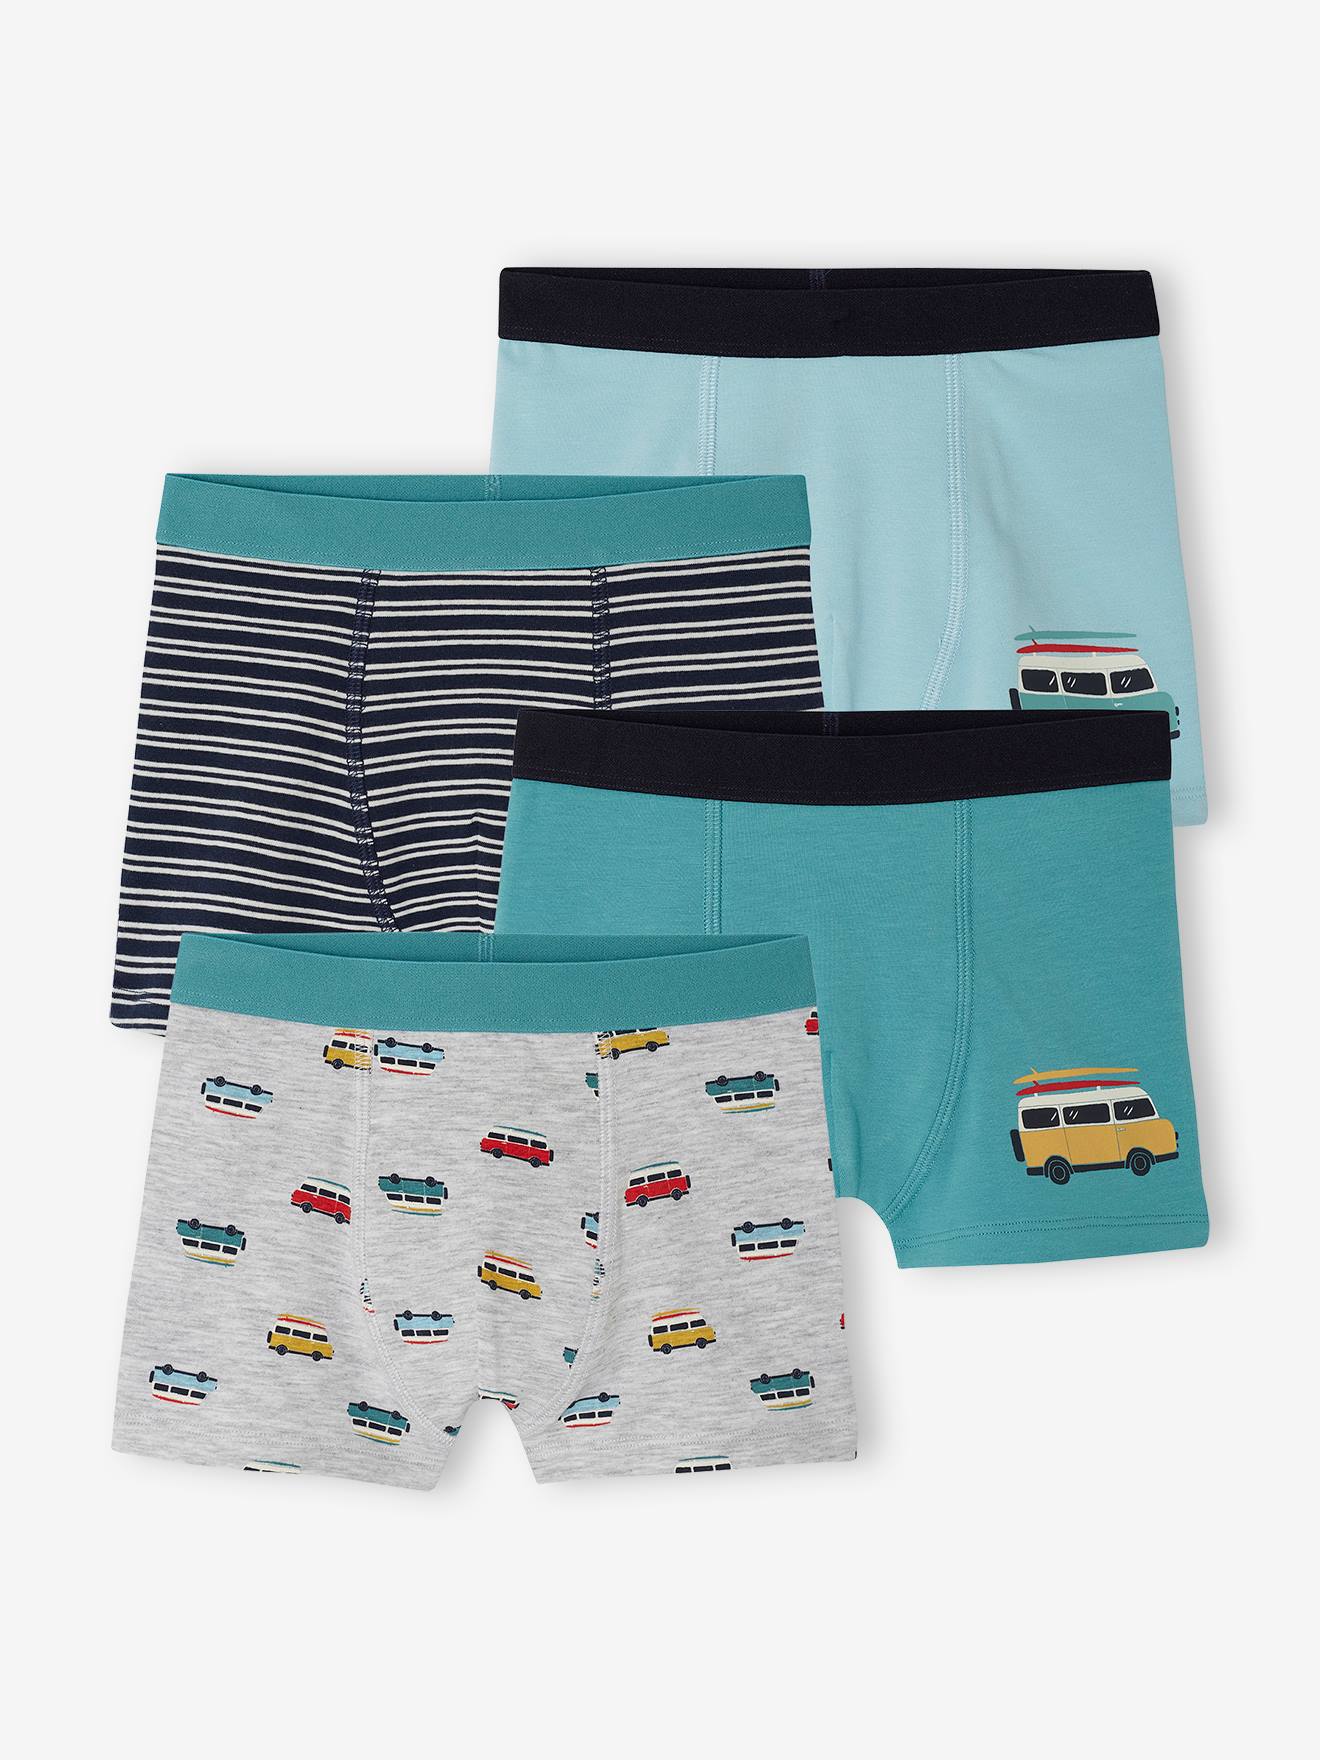 Pack of 4 "Van" Stretch Boxers in Organic Cotton for Boys aqua green